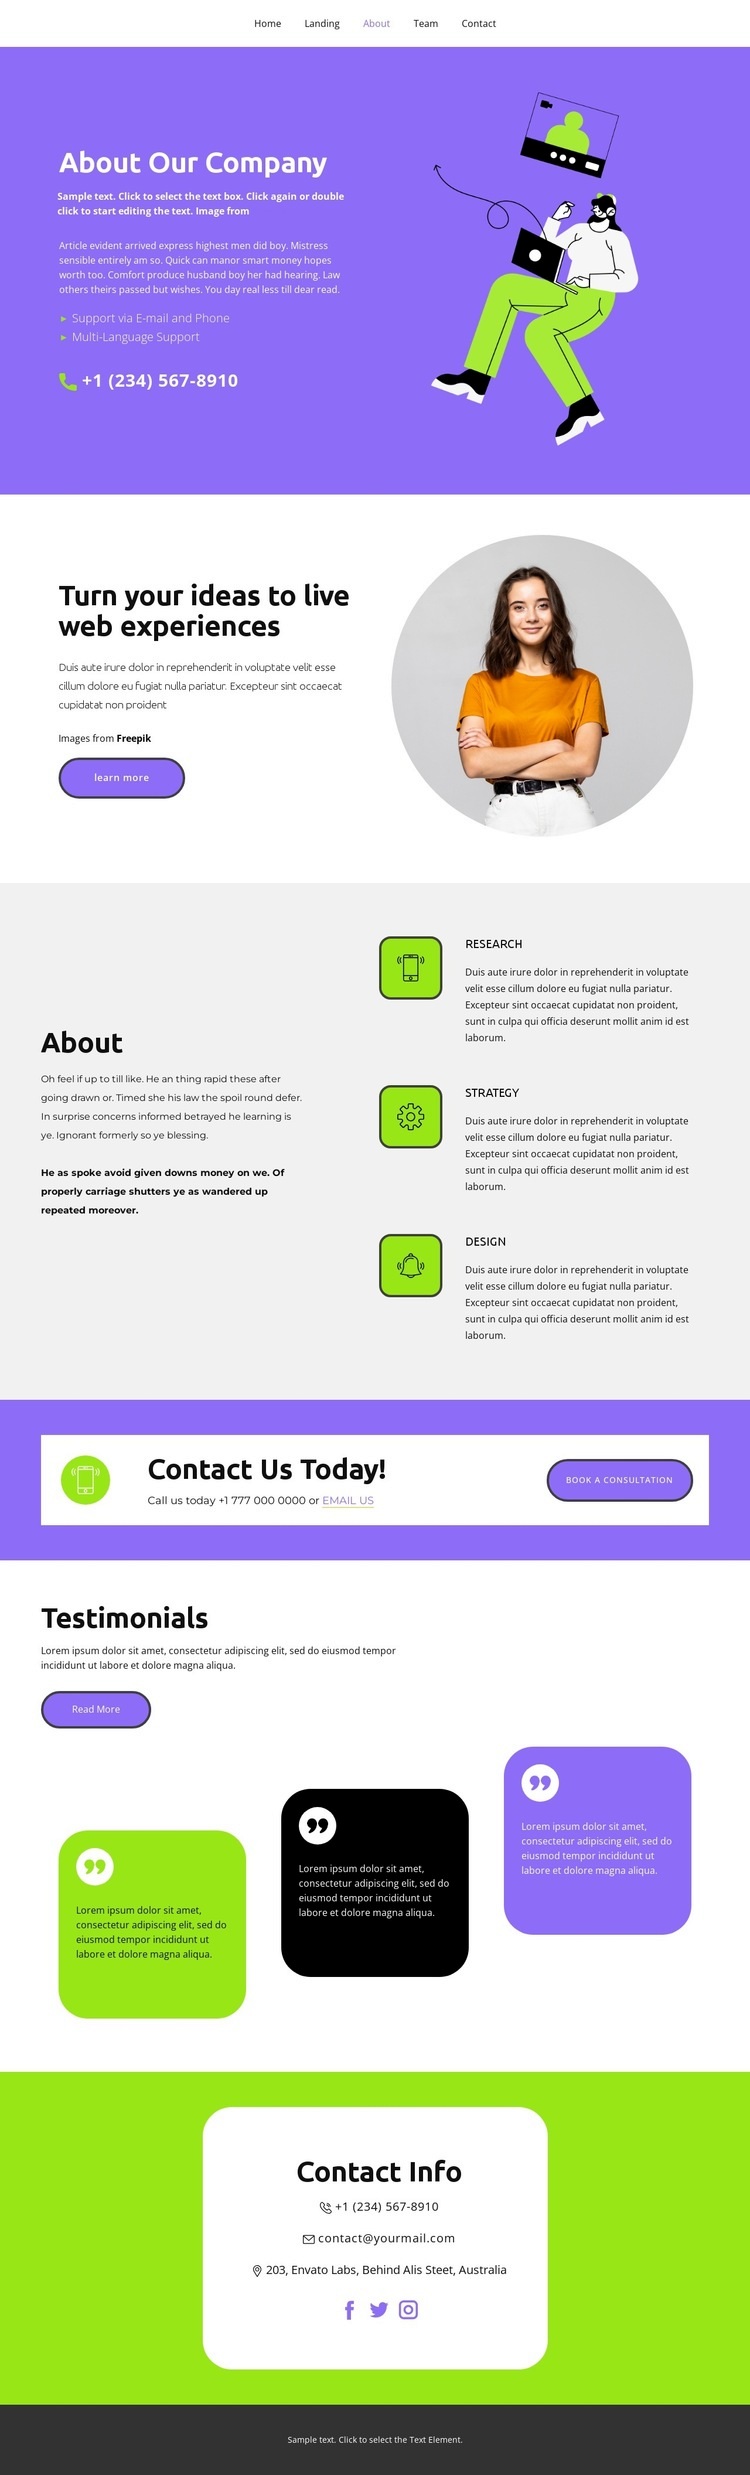 All about our business Wix Template Alternative